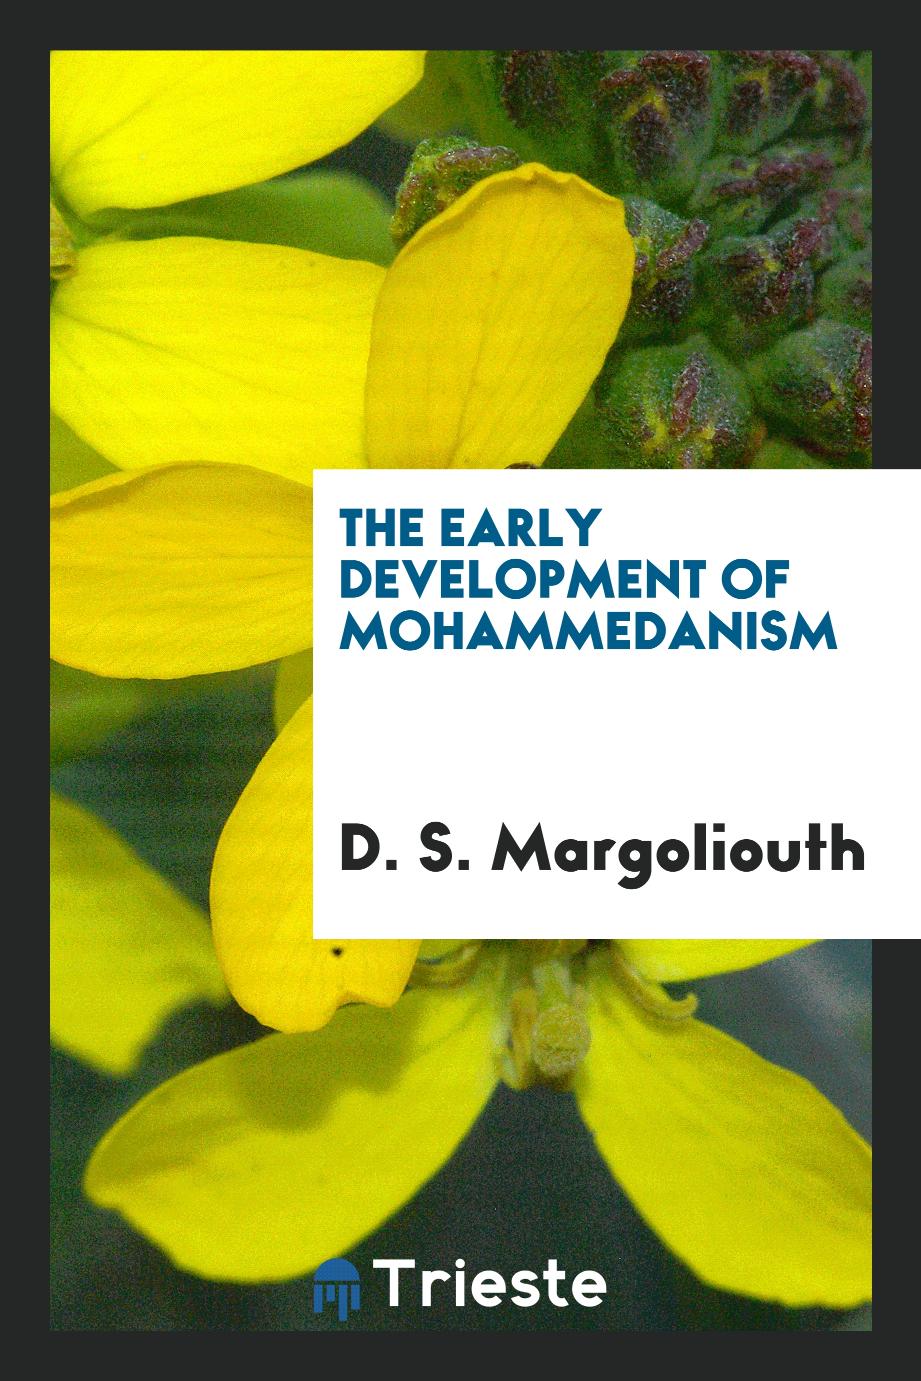 The early development of Mohammedanism